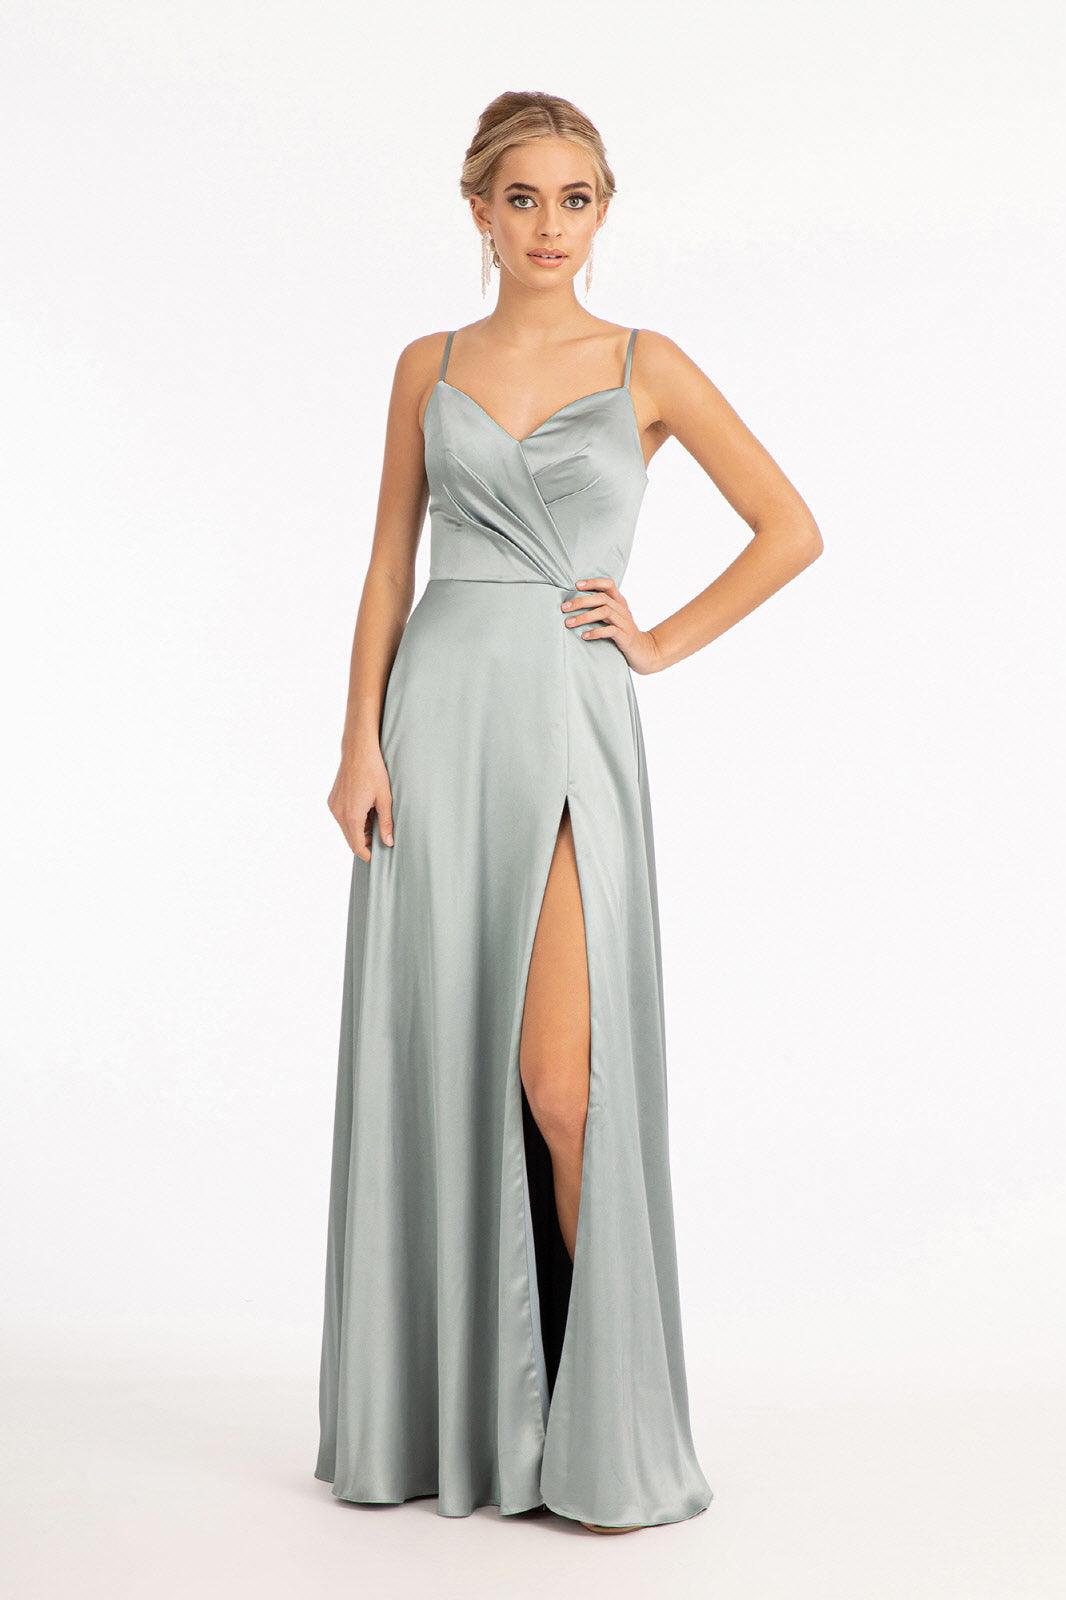 Long Spaghetti Strap Bridesmaid Dress - The Dress Outlet